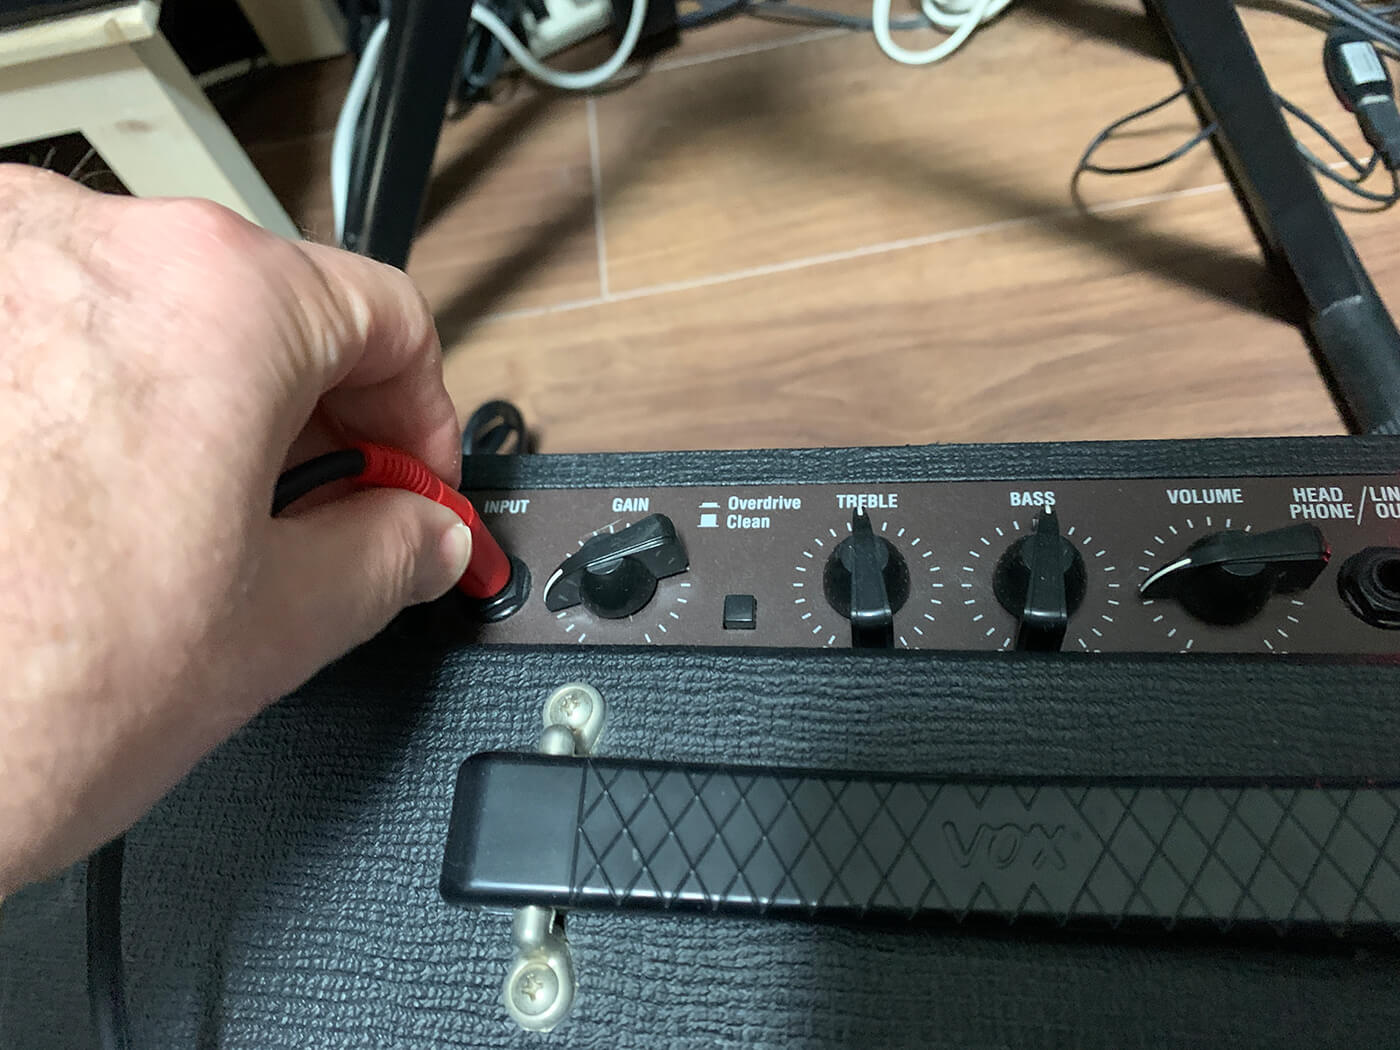 Use a regular audio cable and touch the other end with a finger to create hums, running it directly into an audio interface or a guitar amp for more gain